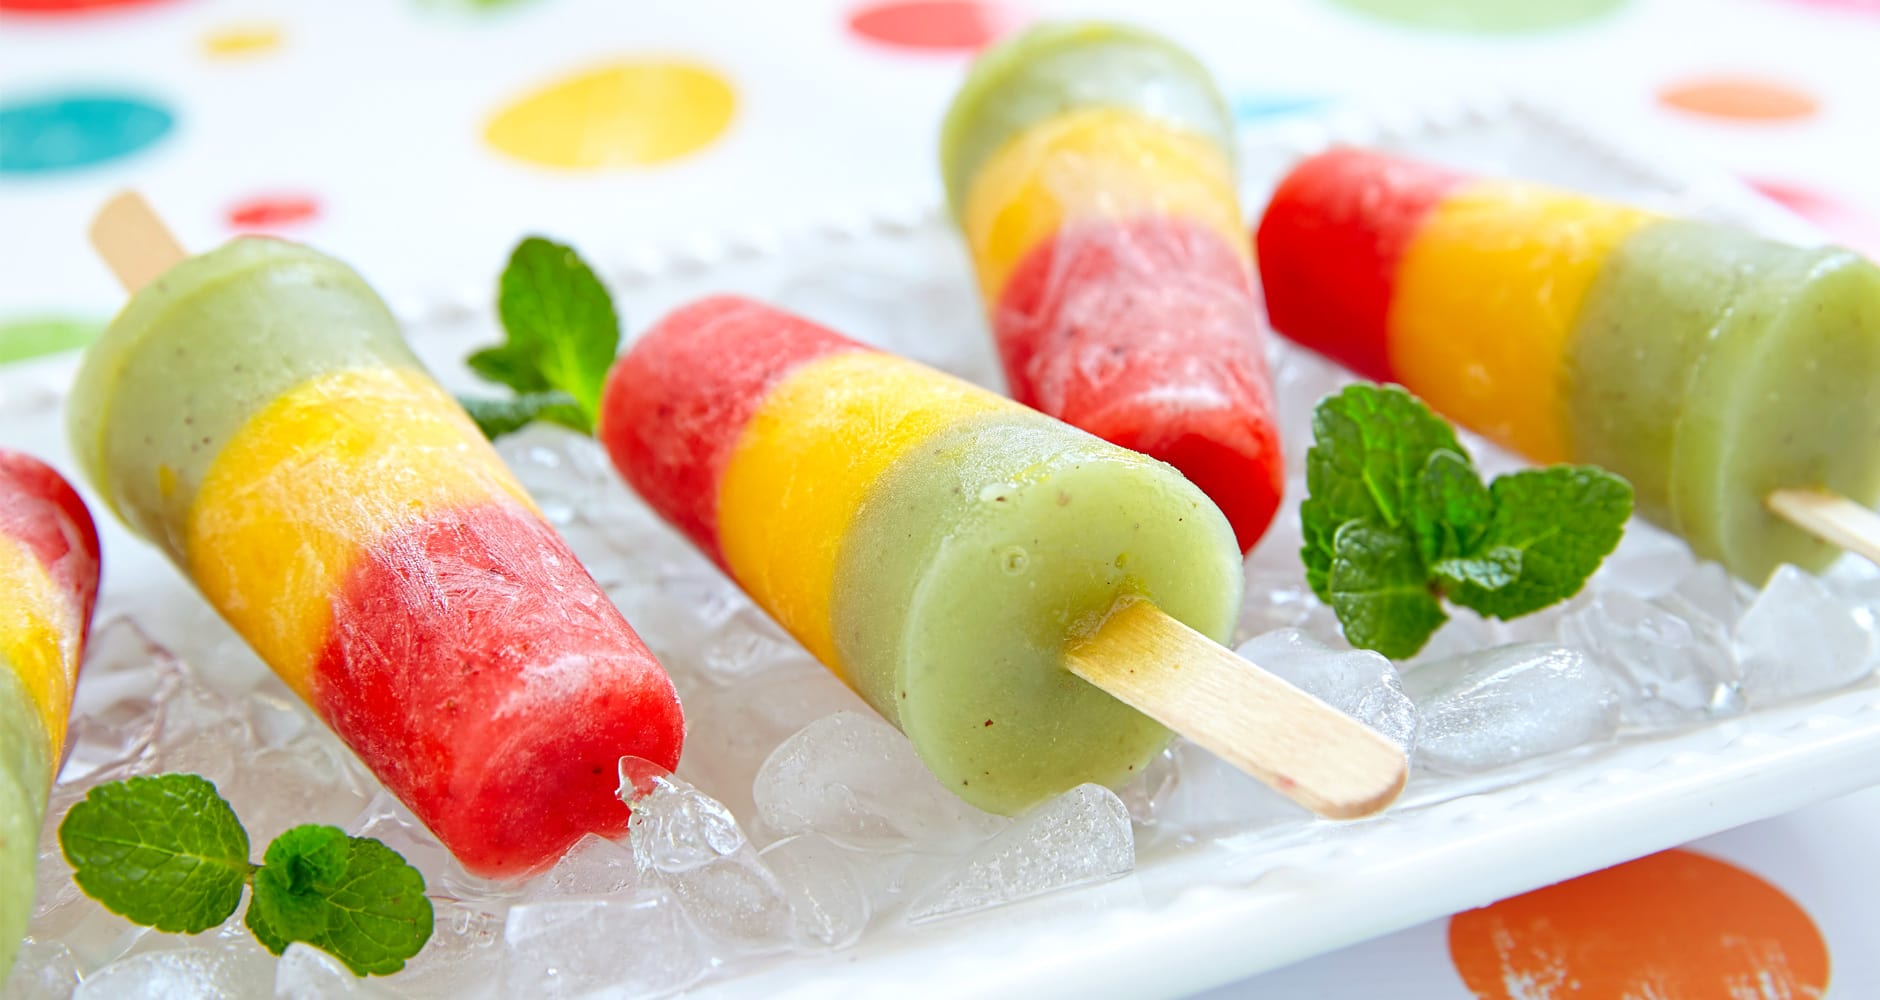 Make Your Own Healthy Ice Pops! - Farmers' Almanac - Plan Your Day